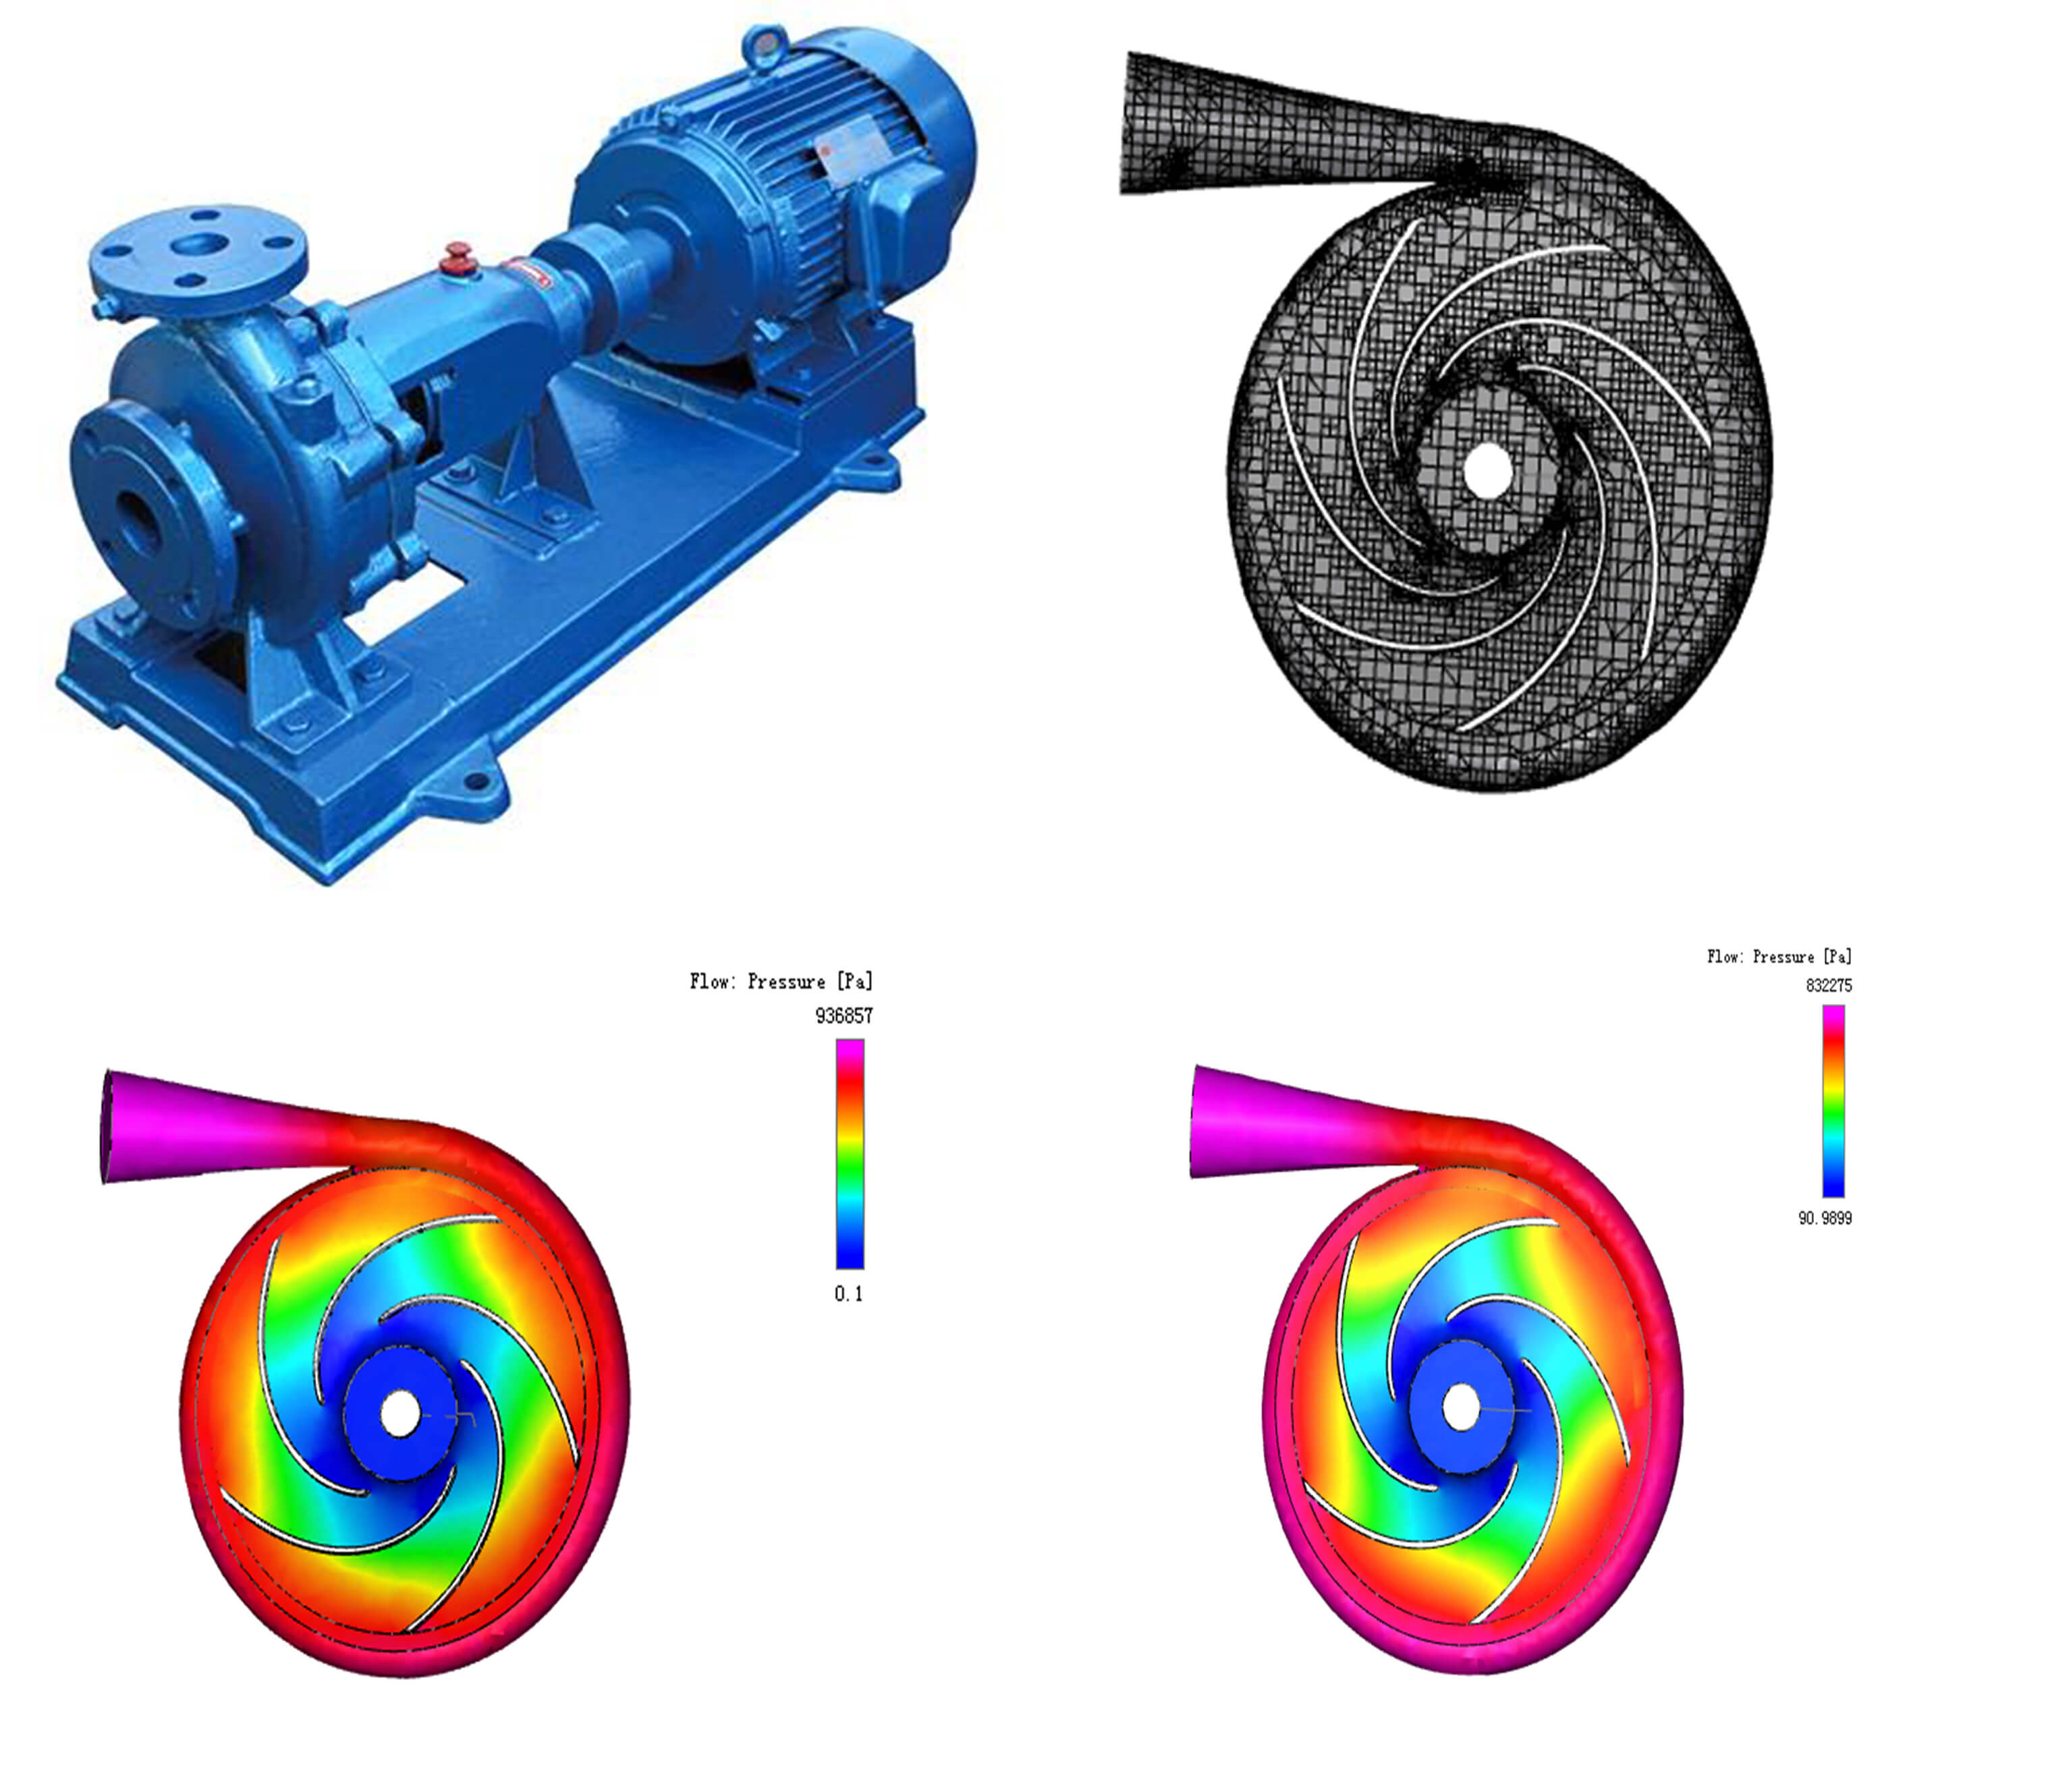 Performance Prediction of an Optimized Centrifugal Pump with High Efficiency